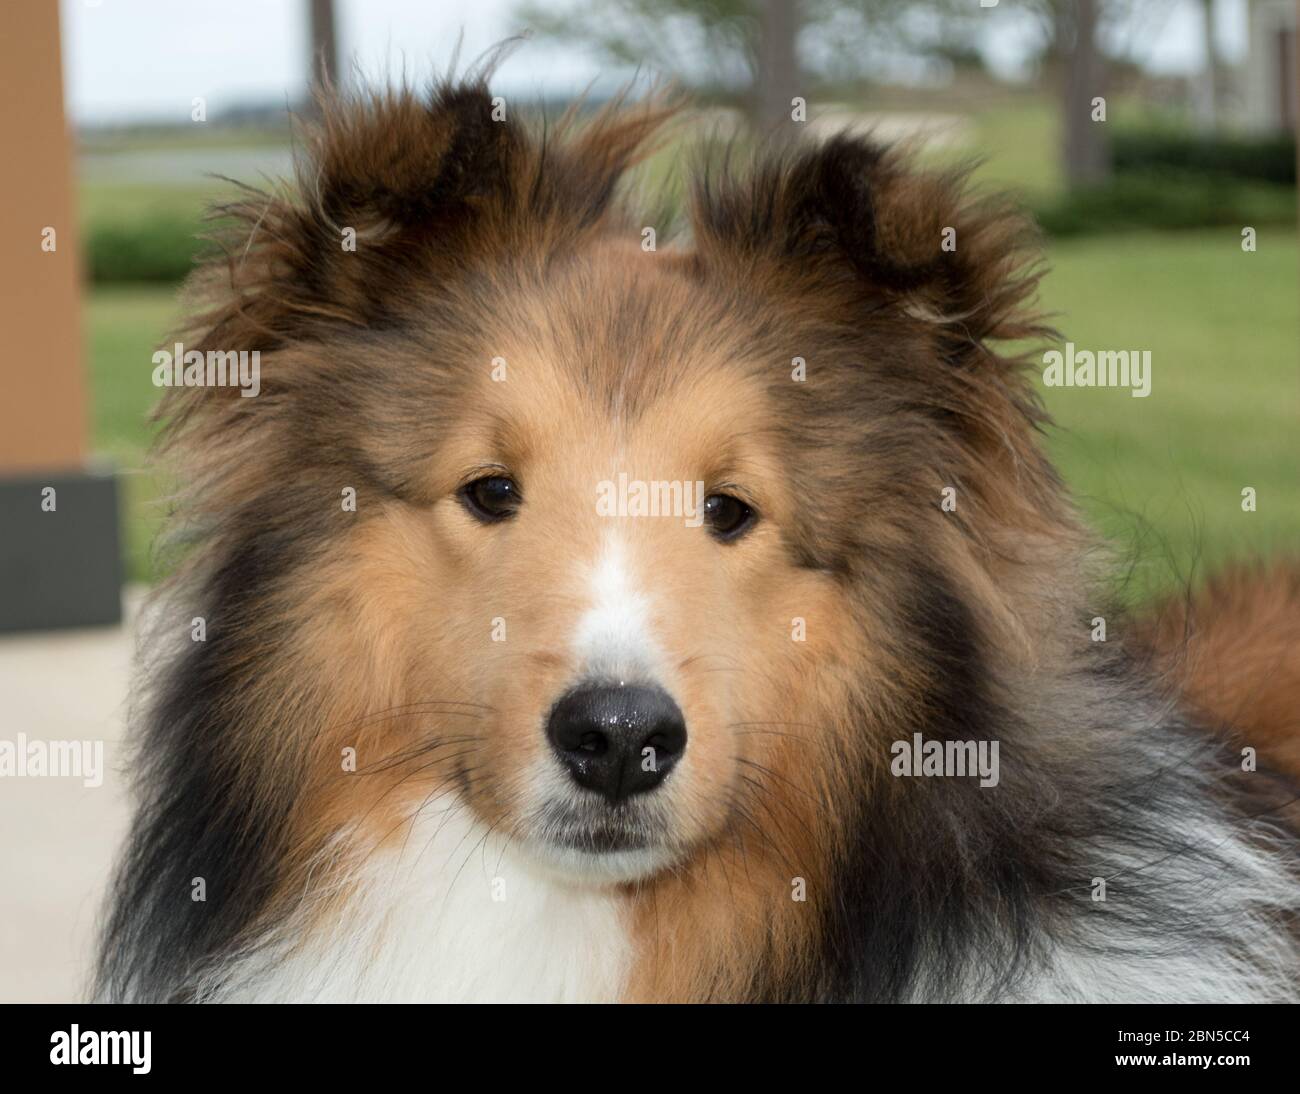 Close up of the friendly face of a young adult Shetland Sheepdog, a breed of herding dog often referred to as a sheltie or collie Stock Photo